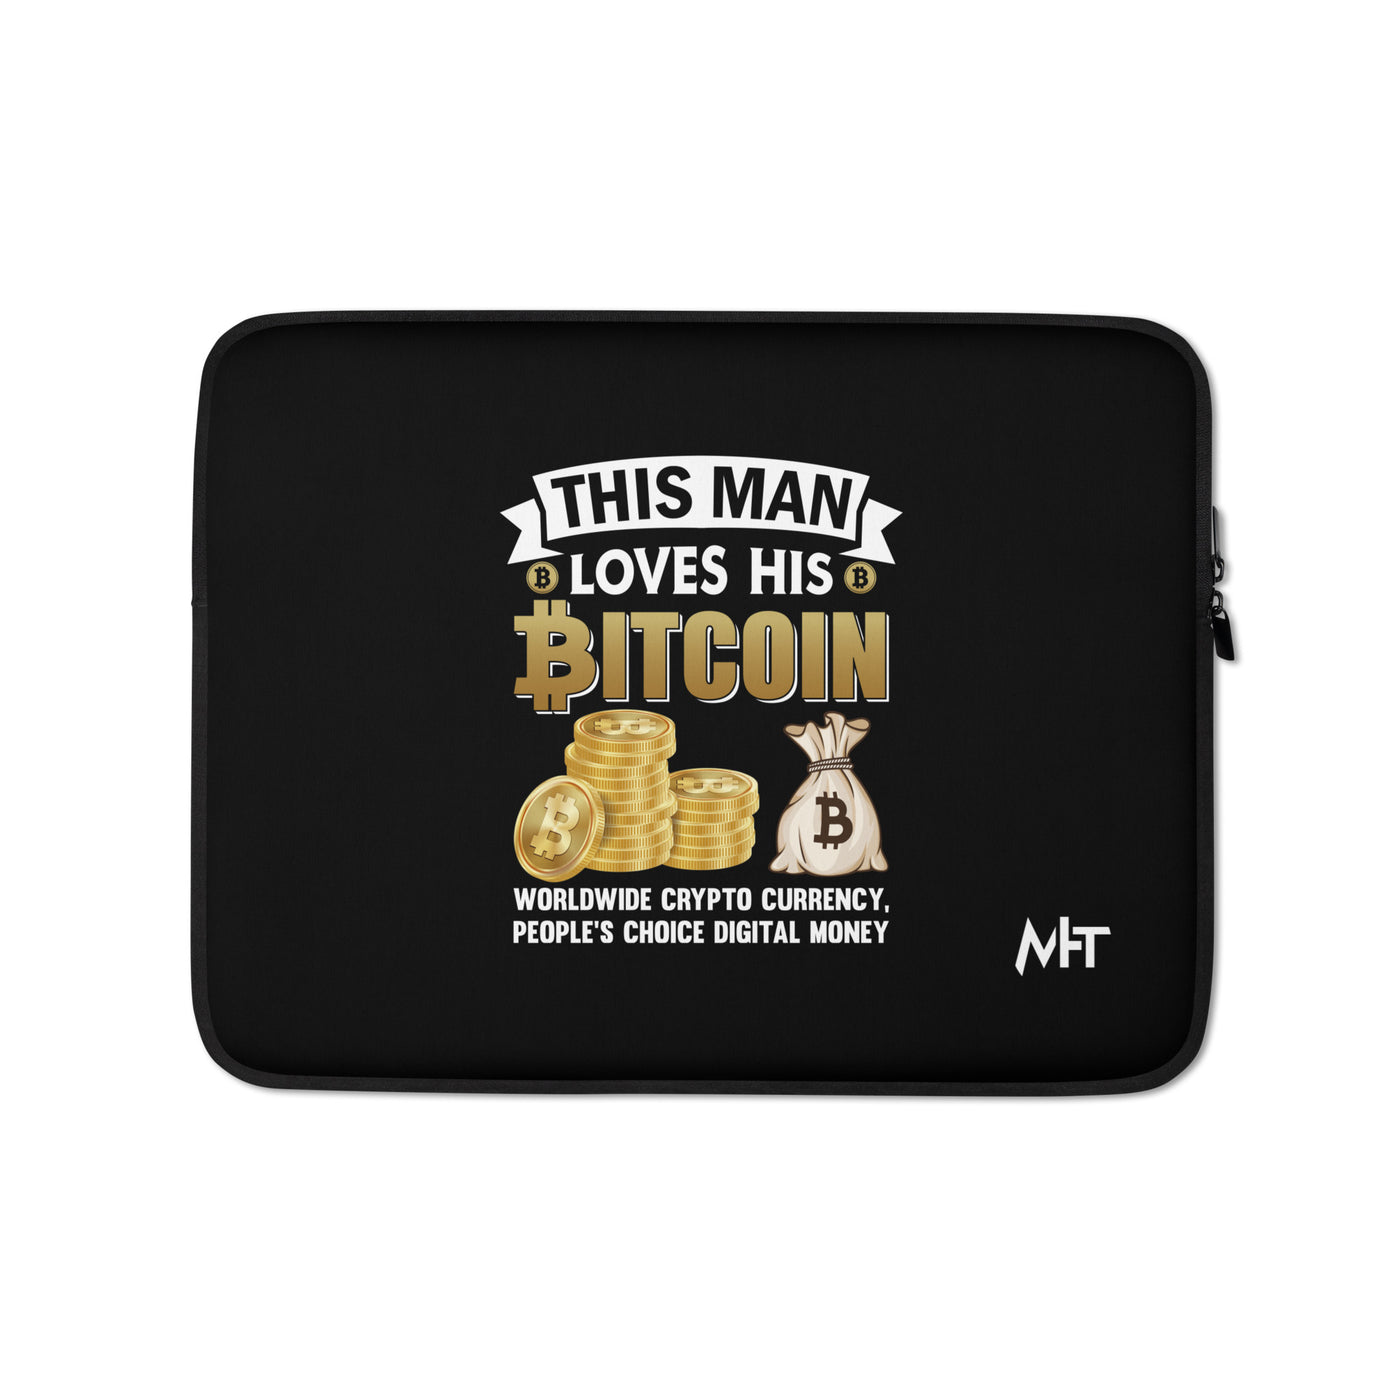 This Man loves his Bitcoin - Laptop Sleeve